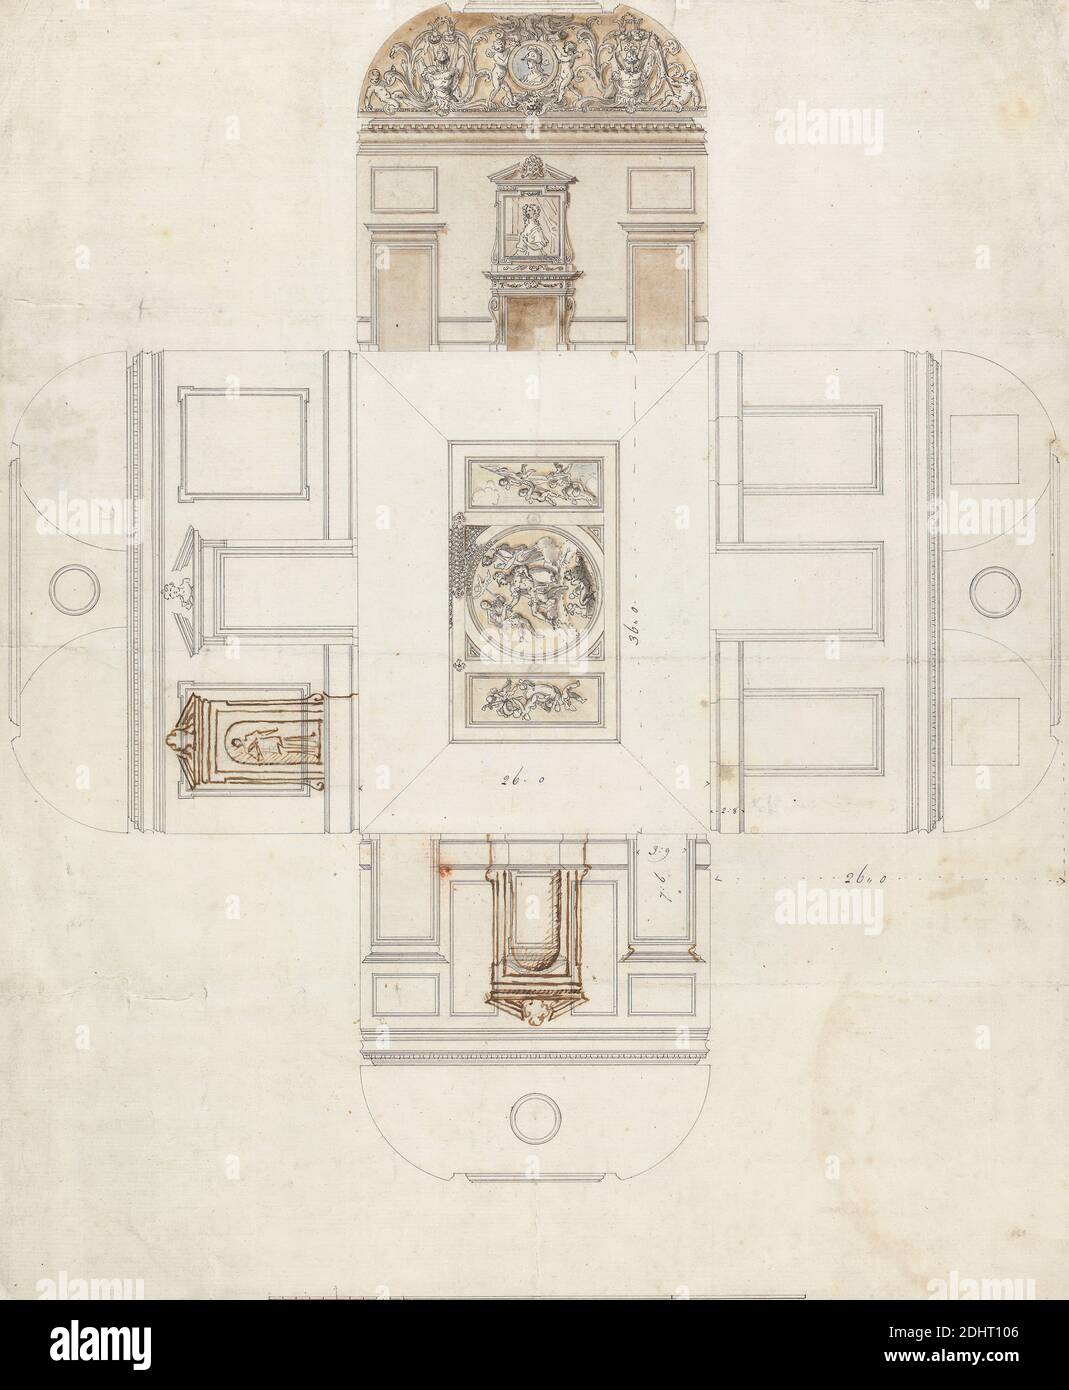 Stowe House, Buckinghamshire: Design for Ceiling and Wall Decoration, William Kent, ca.1686–1748, British, between 1728 and 1732, Graphite, pen and black and brown ink, brown and gray wash on moderately thick, slightly textured, white laid paper with four fold marks bar scale of 2/13 inch to 1 foot, Sheet: 15 1/8 x 12 1/2 inches (38.4 x 31.8 cm), architectural subject, ceiling, cove ceilings, Palladian, plans (drawings), reflected ceiling plans, Buckingham, Buckinghamshire, England, Europe, Stowe house, United Kingdom Stock Photo